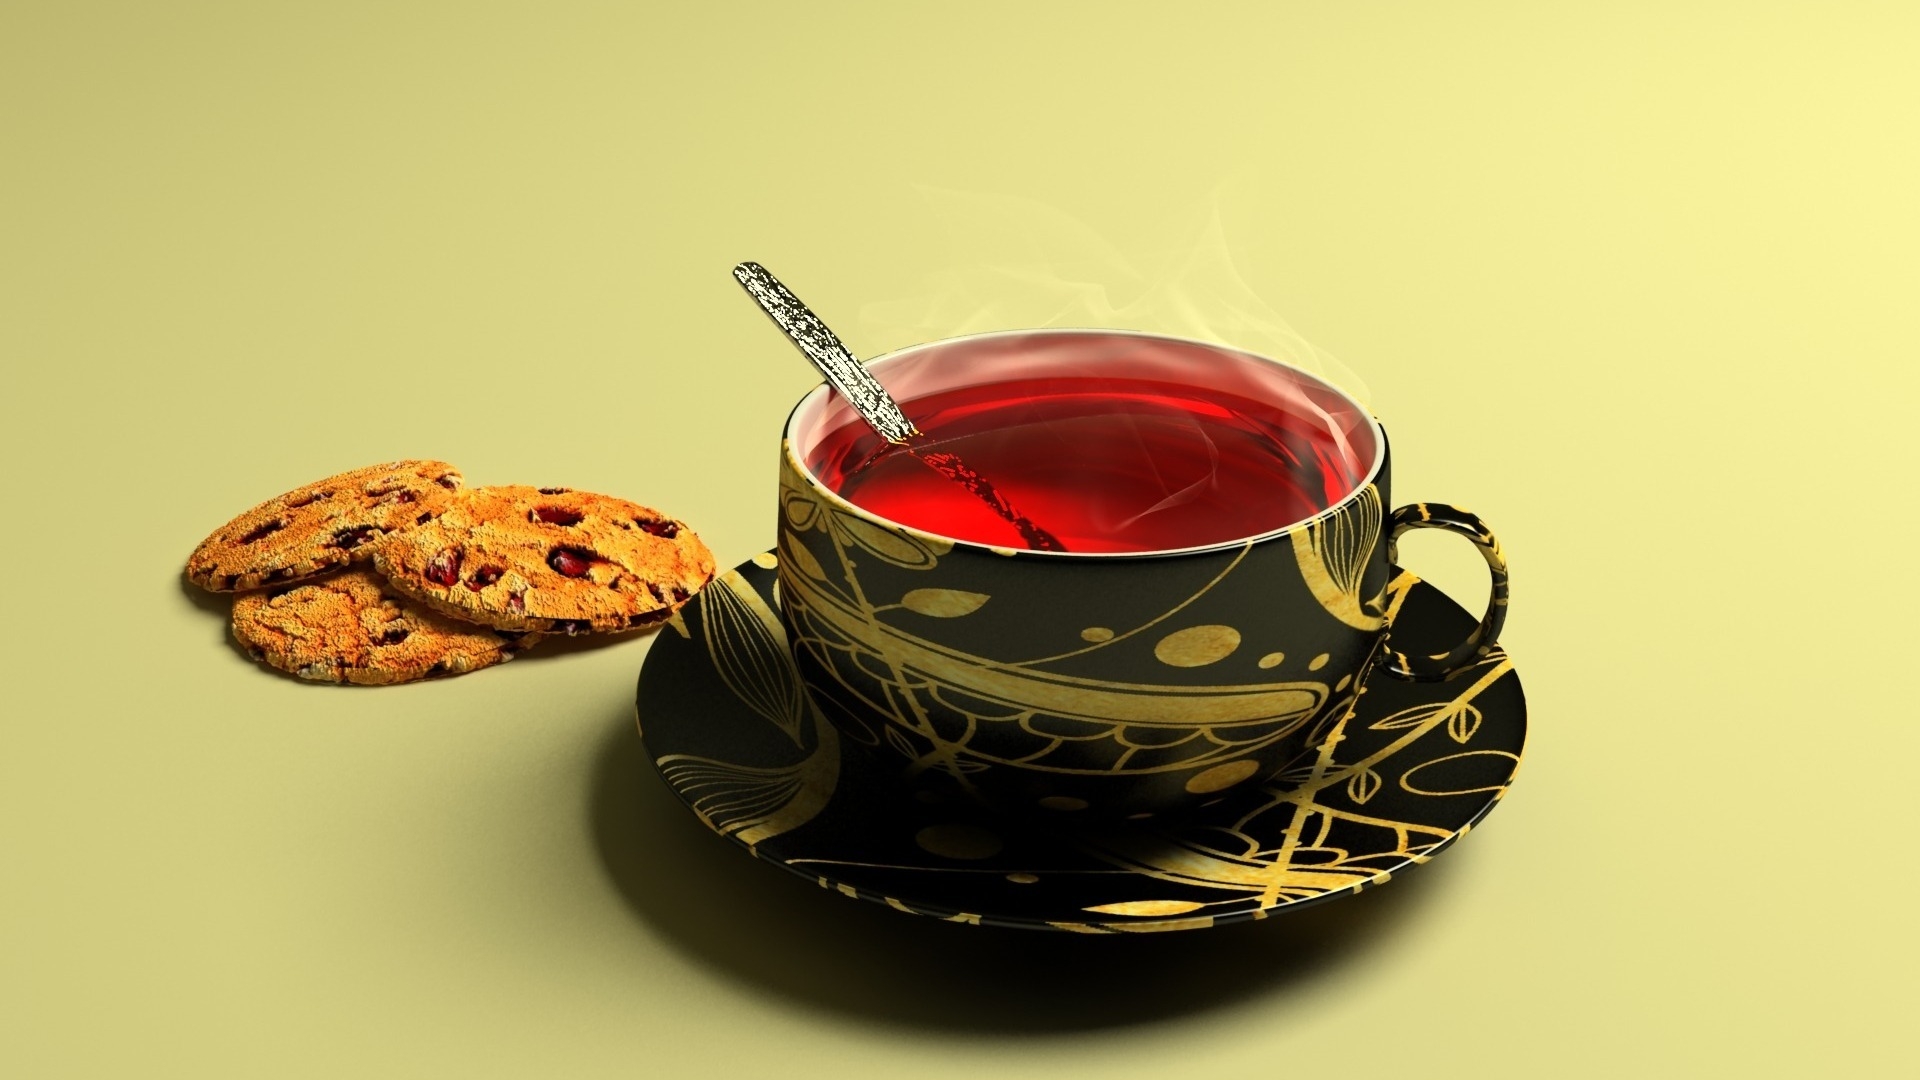 Cup of Tea for 1920 x 1080 HDTV 1080p resolution